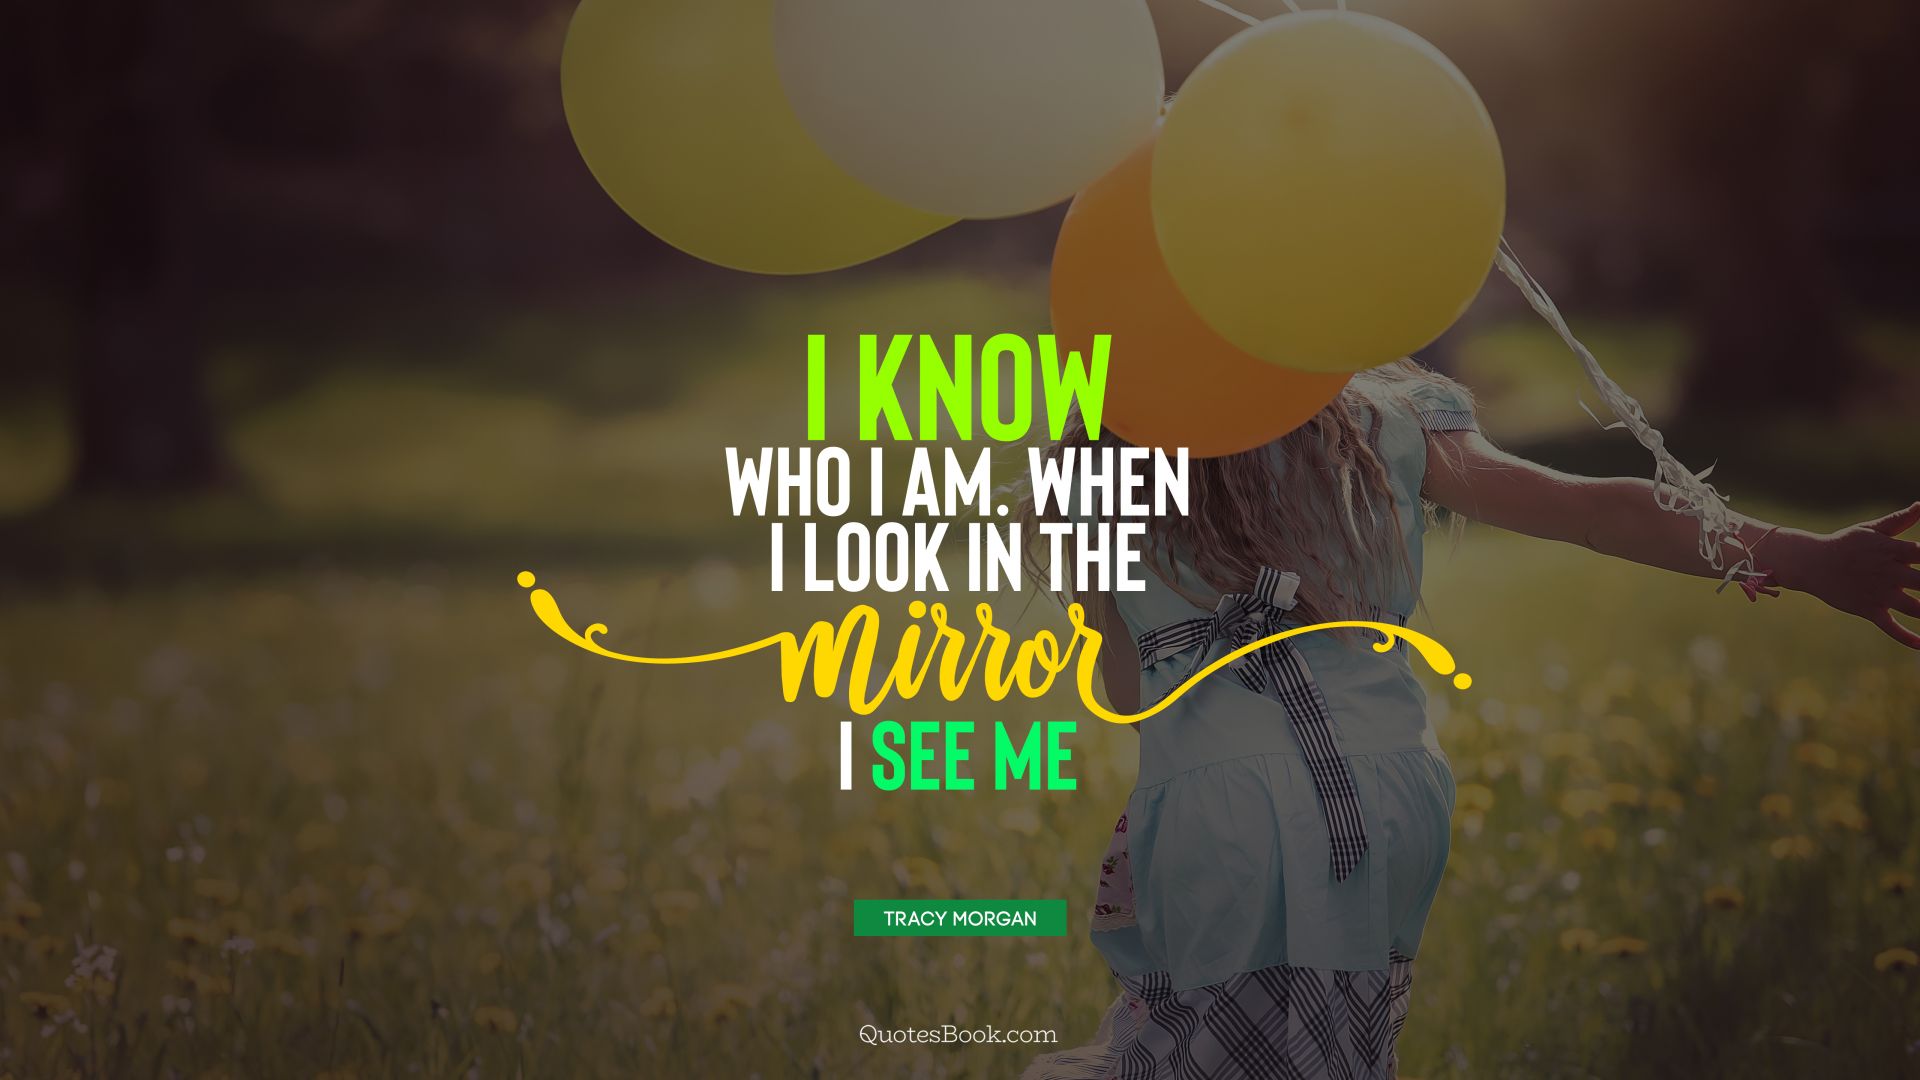 I know who I am. When I look in the mirror, I see me. - Quote by Tracy Morgan